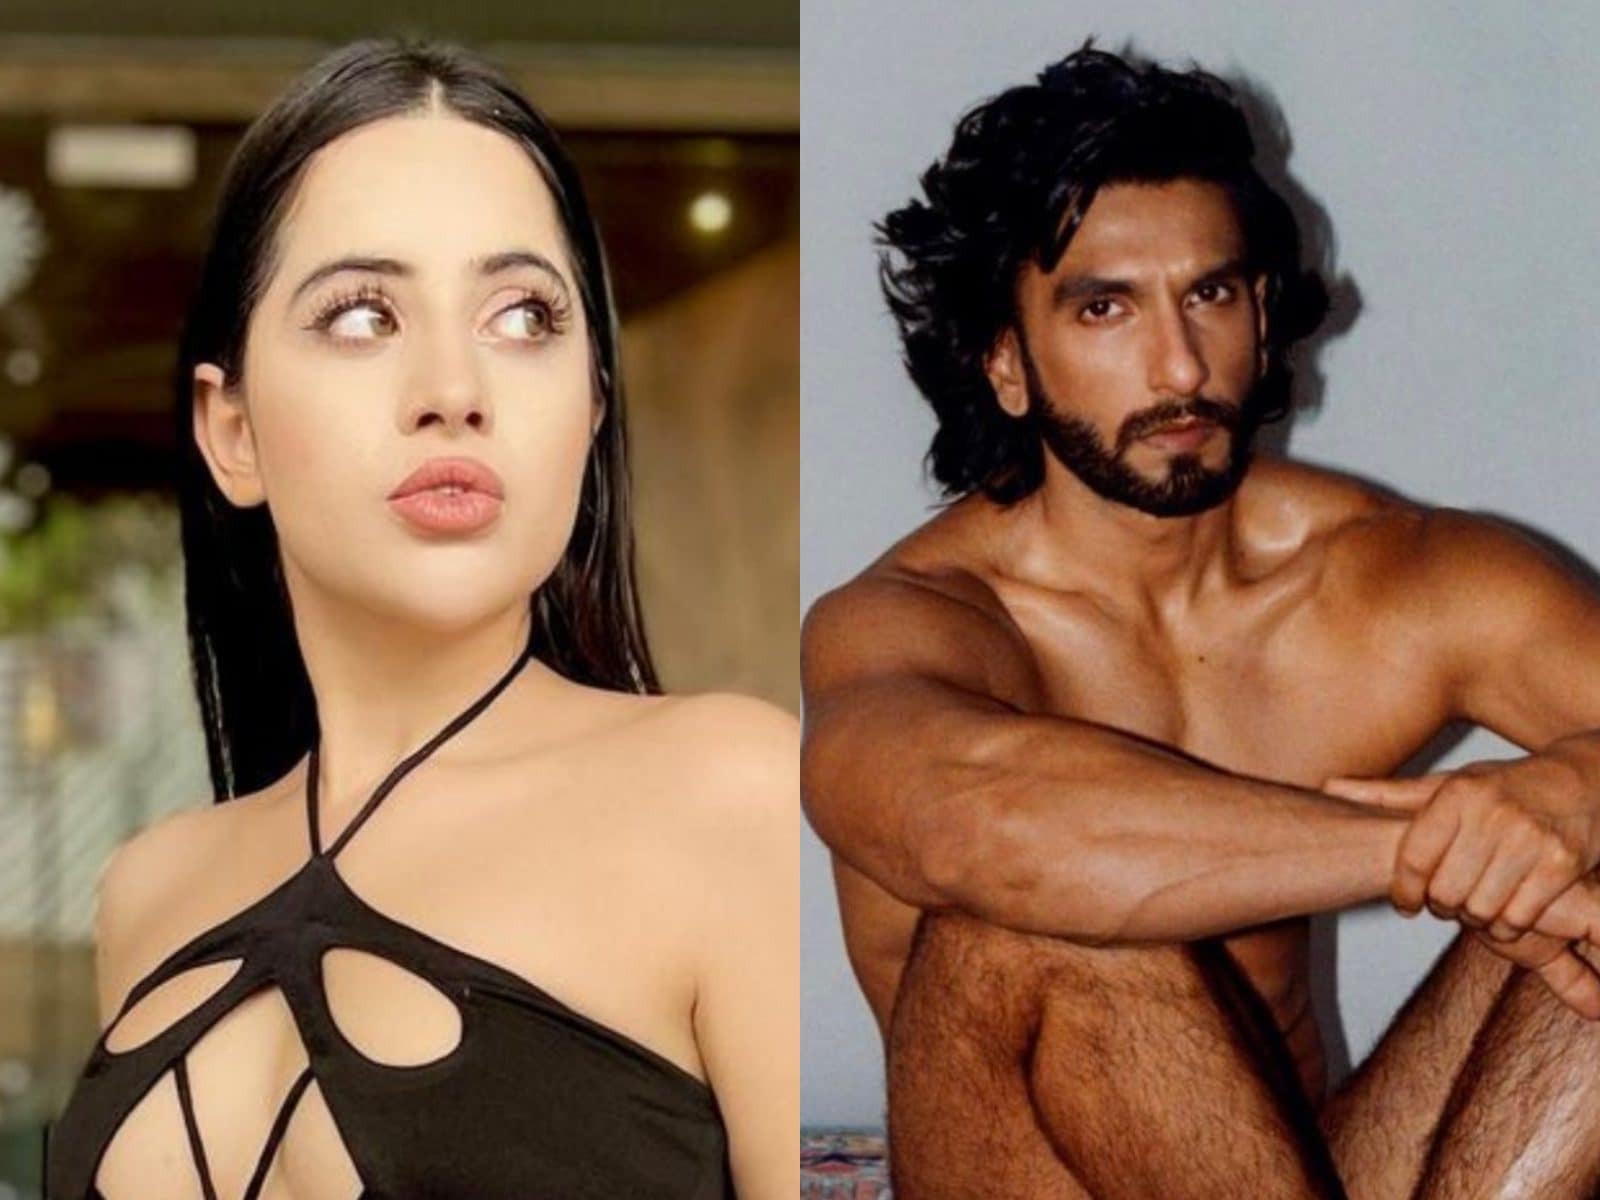 English Sex Video Priyanka - Uorfi Javed Reacts To Ranveer Singh's Nude Pictures, Says 'Nobody's  Sentiments Have Been Hurt' - News18